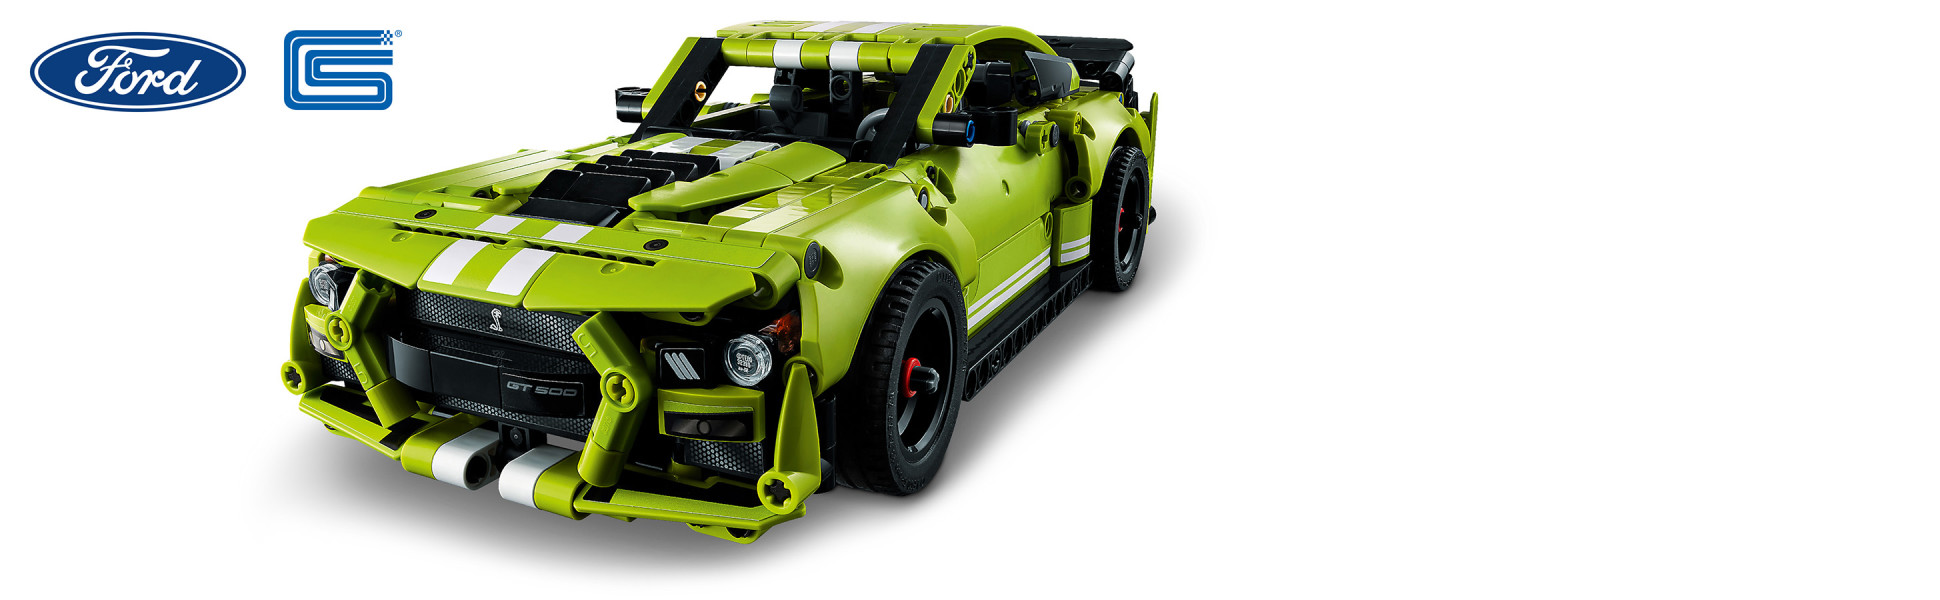 LEGO Technic Ford Mustang Shelby® GT500® 42138 by LEGO Systems Inc